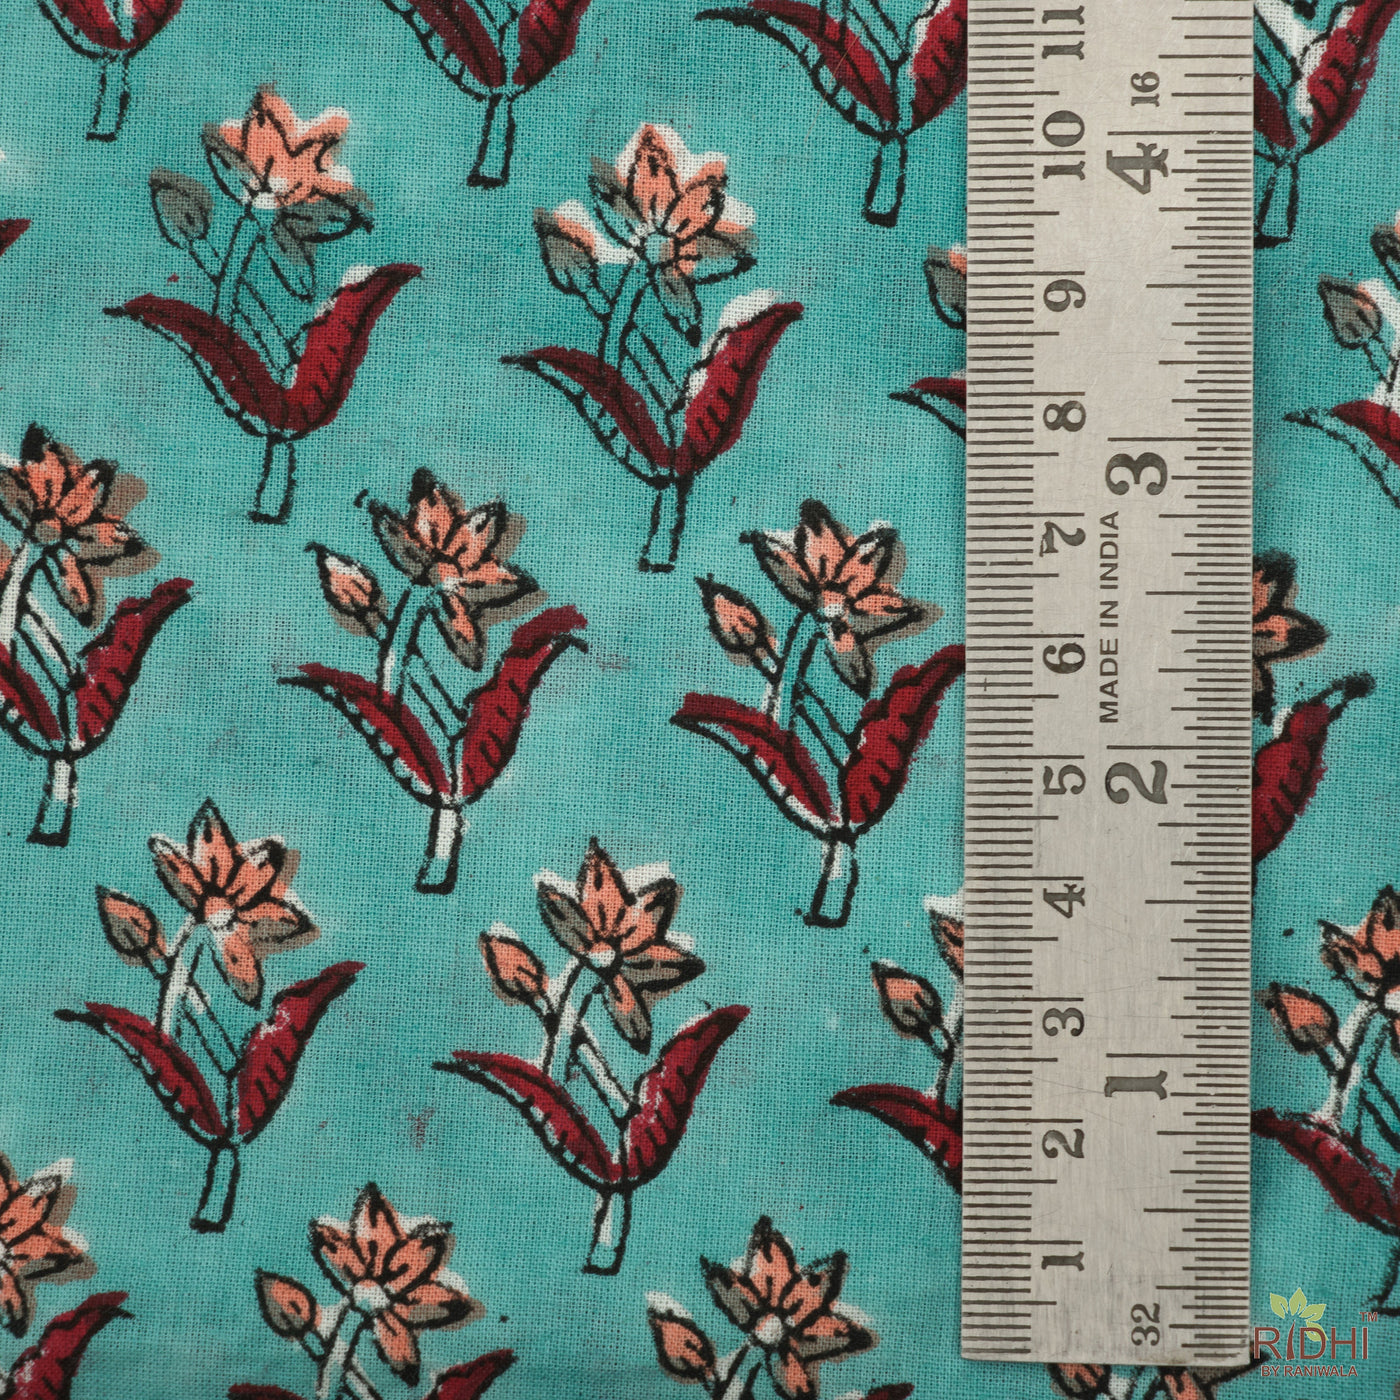 Teal Blue, Mahogany, Salmon Pink Floral Indian Hand Block Printed 100% Cotton Cloth Fabric by the Yard, Women's Dresses Curtains Duvet Cover